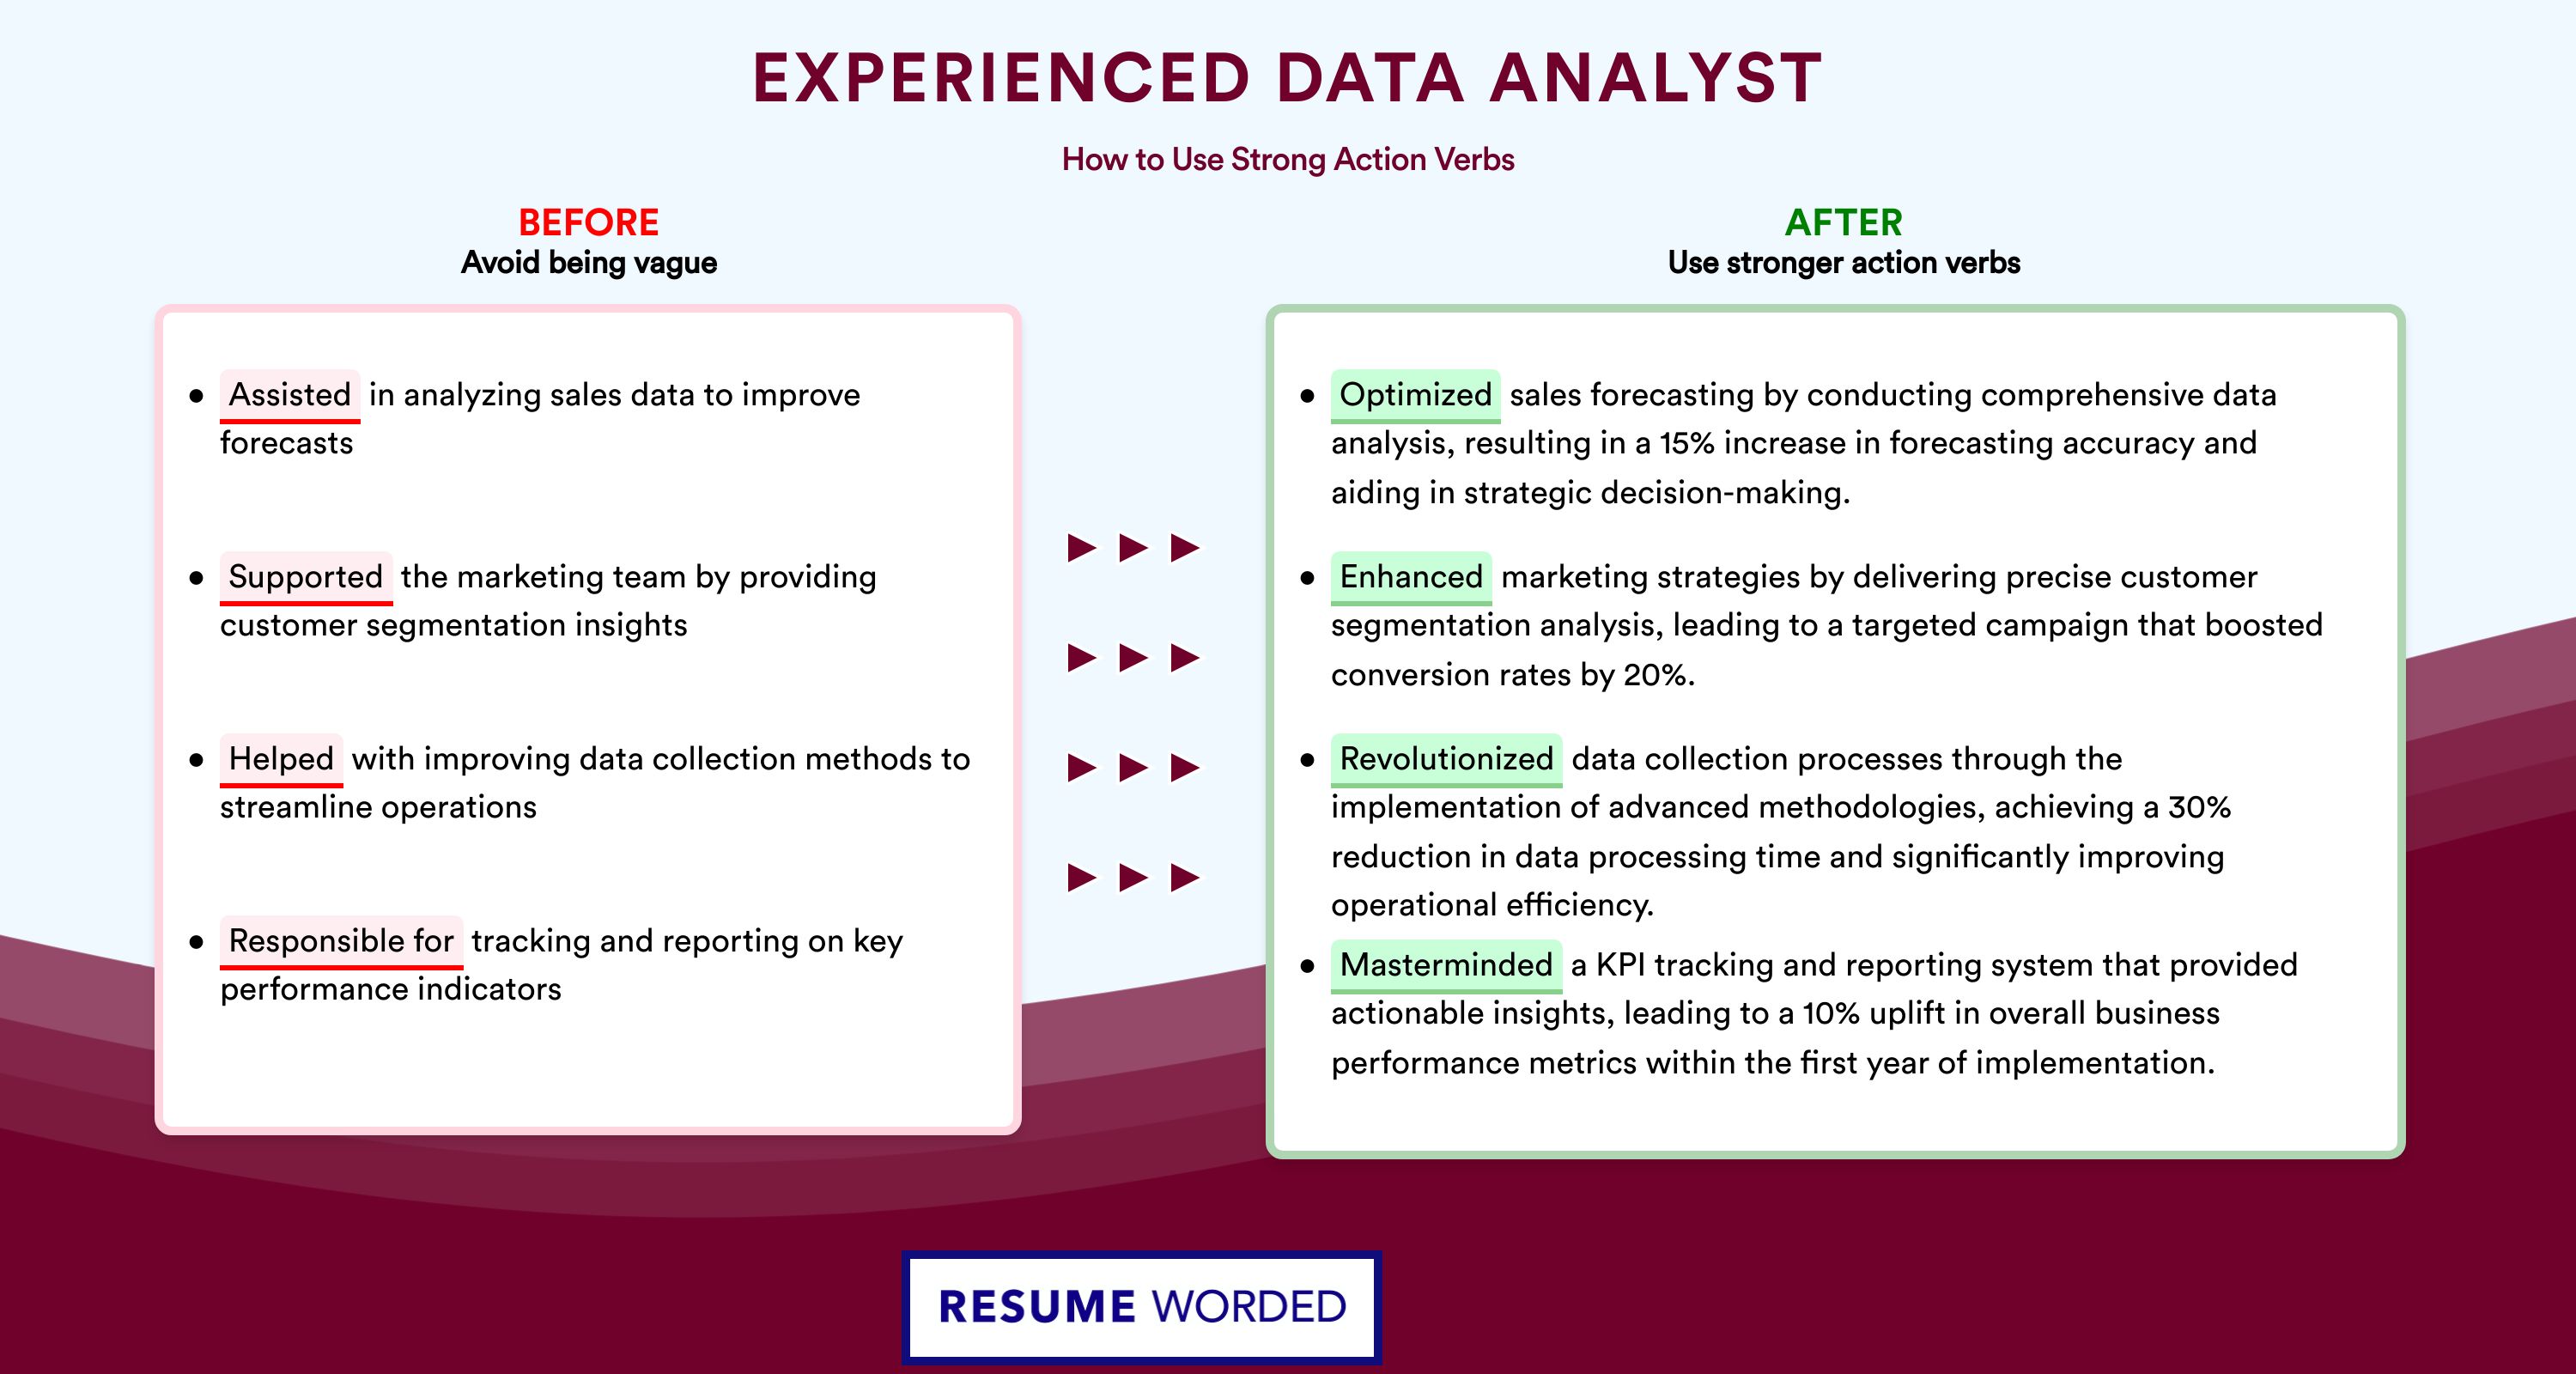 Action Verbs for Experienced Data Analyst